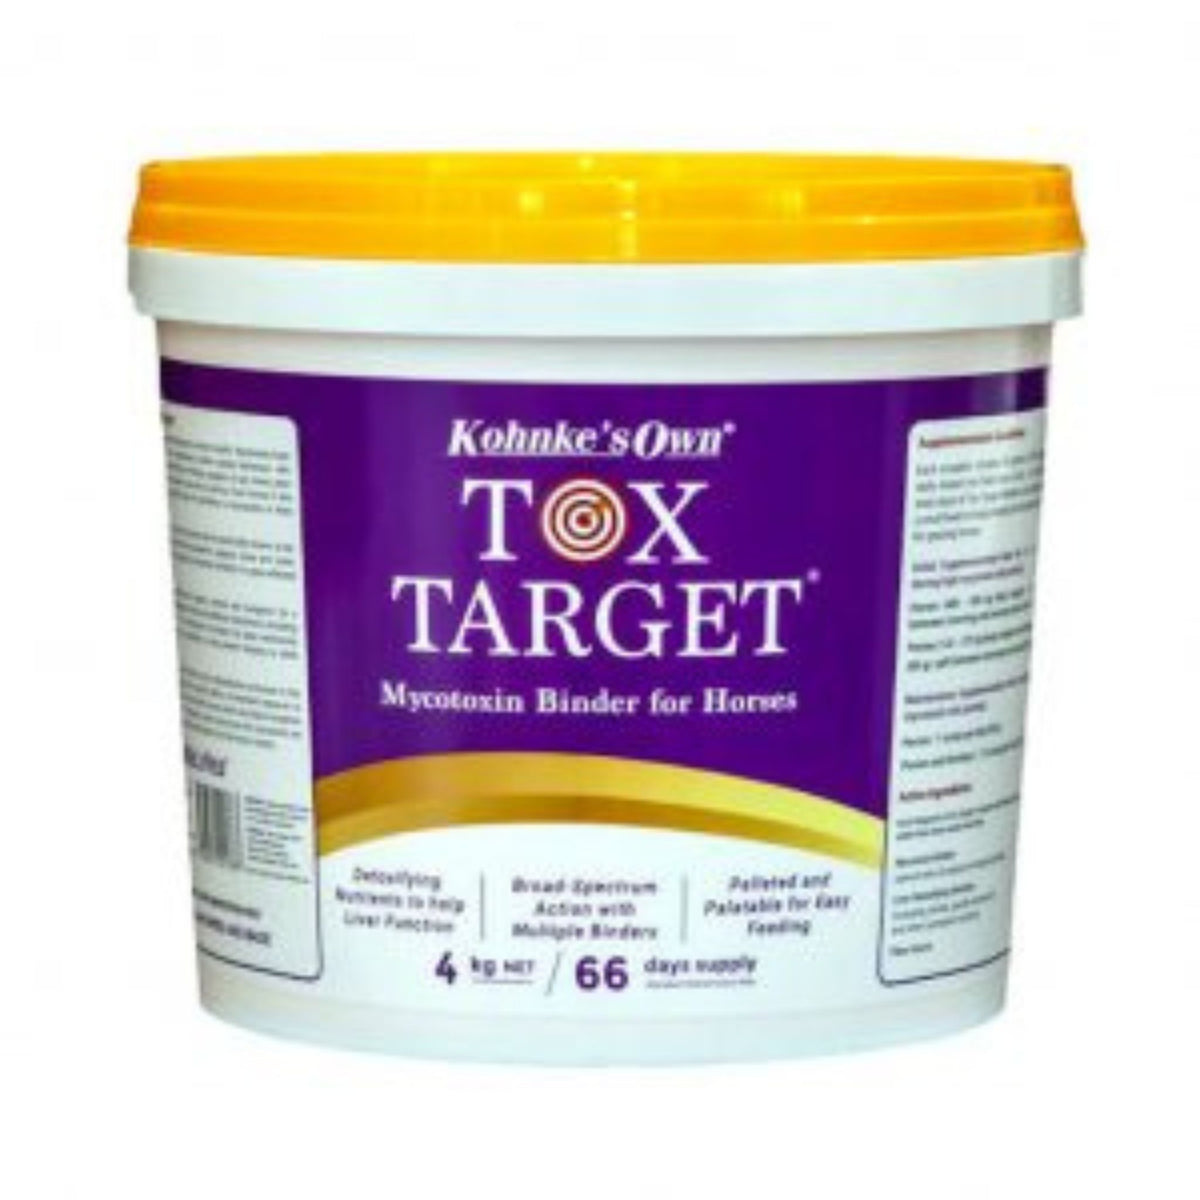 White bucket with yellow lid and a purple label on the bucket with the title TOX TARGET